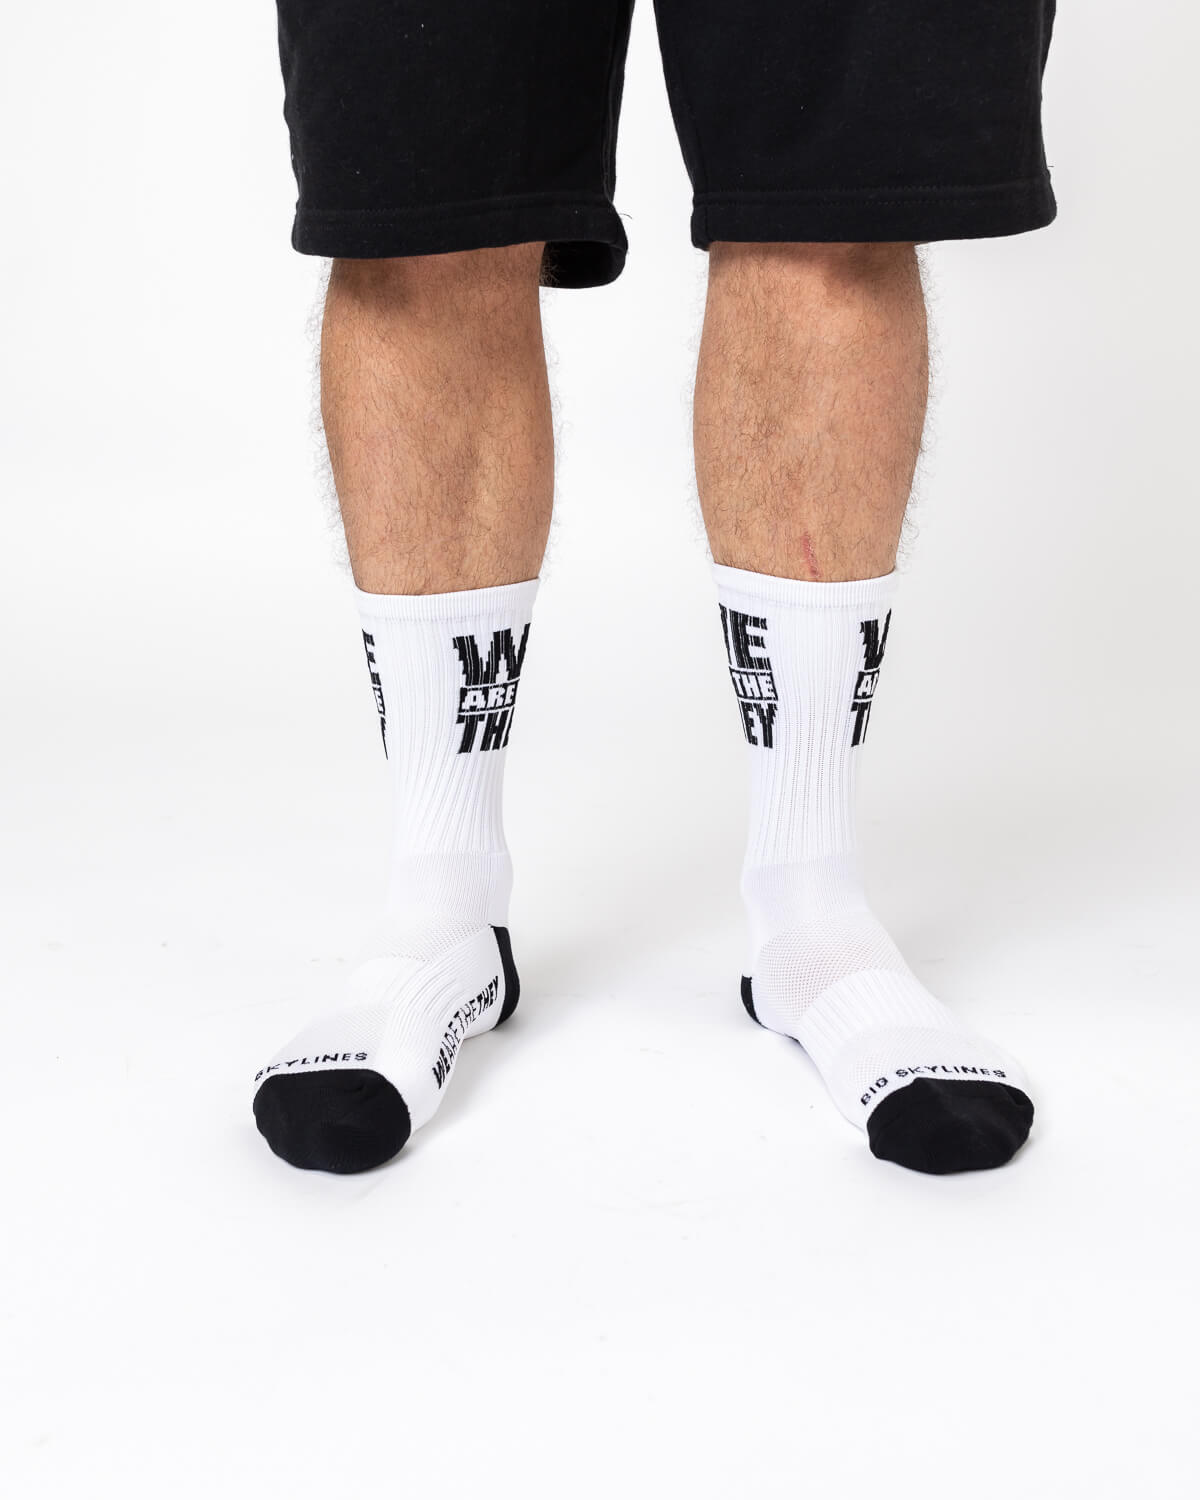 We Are The They Socks - White